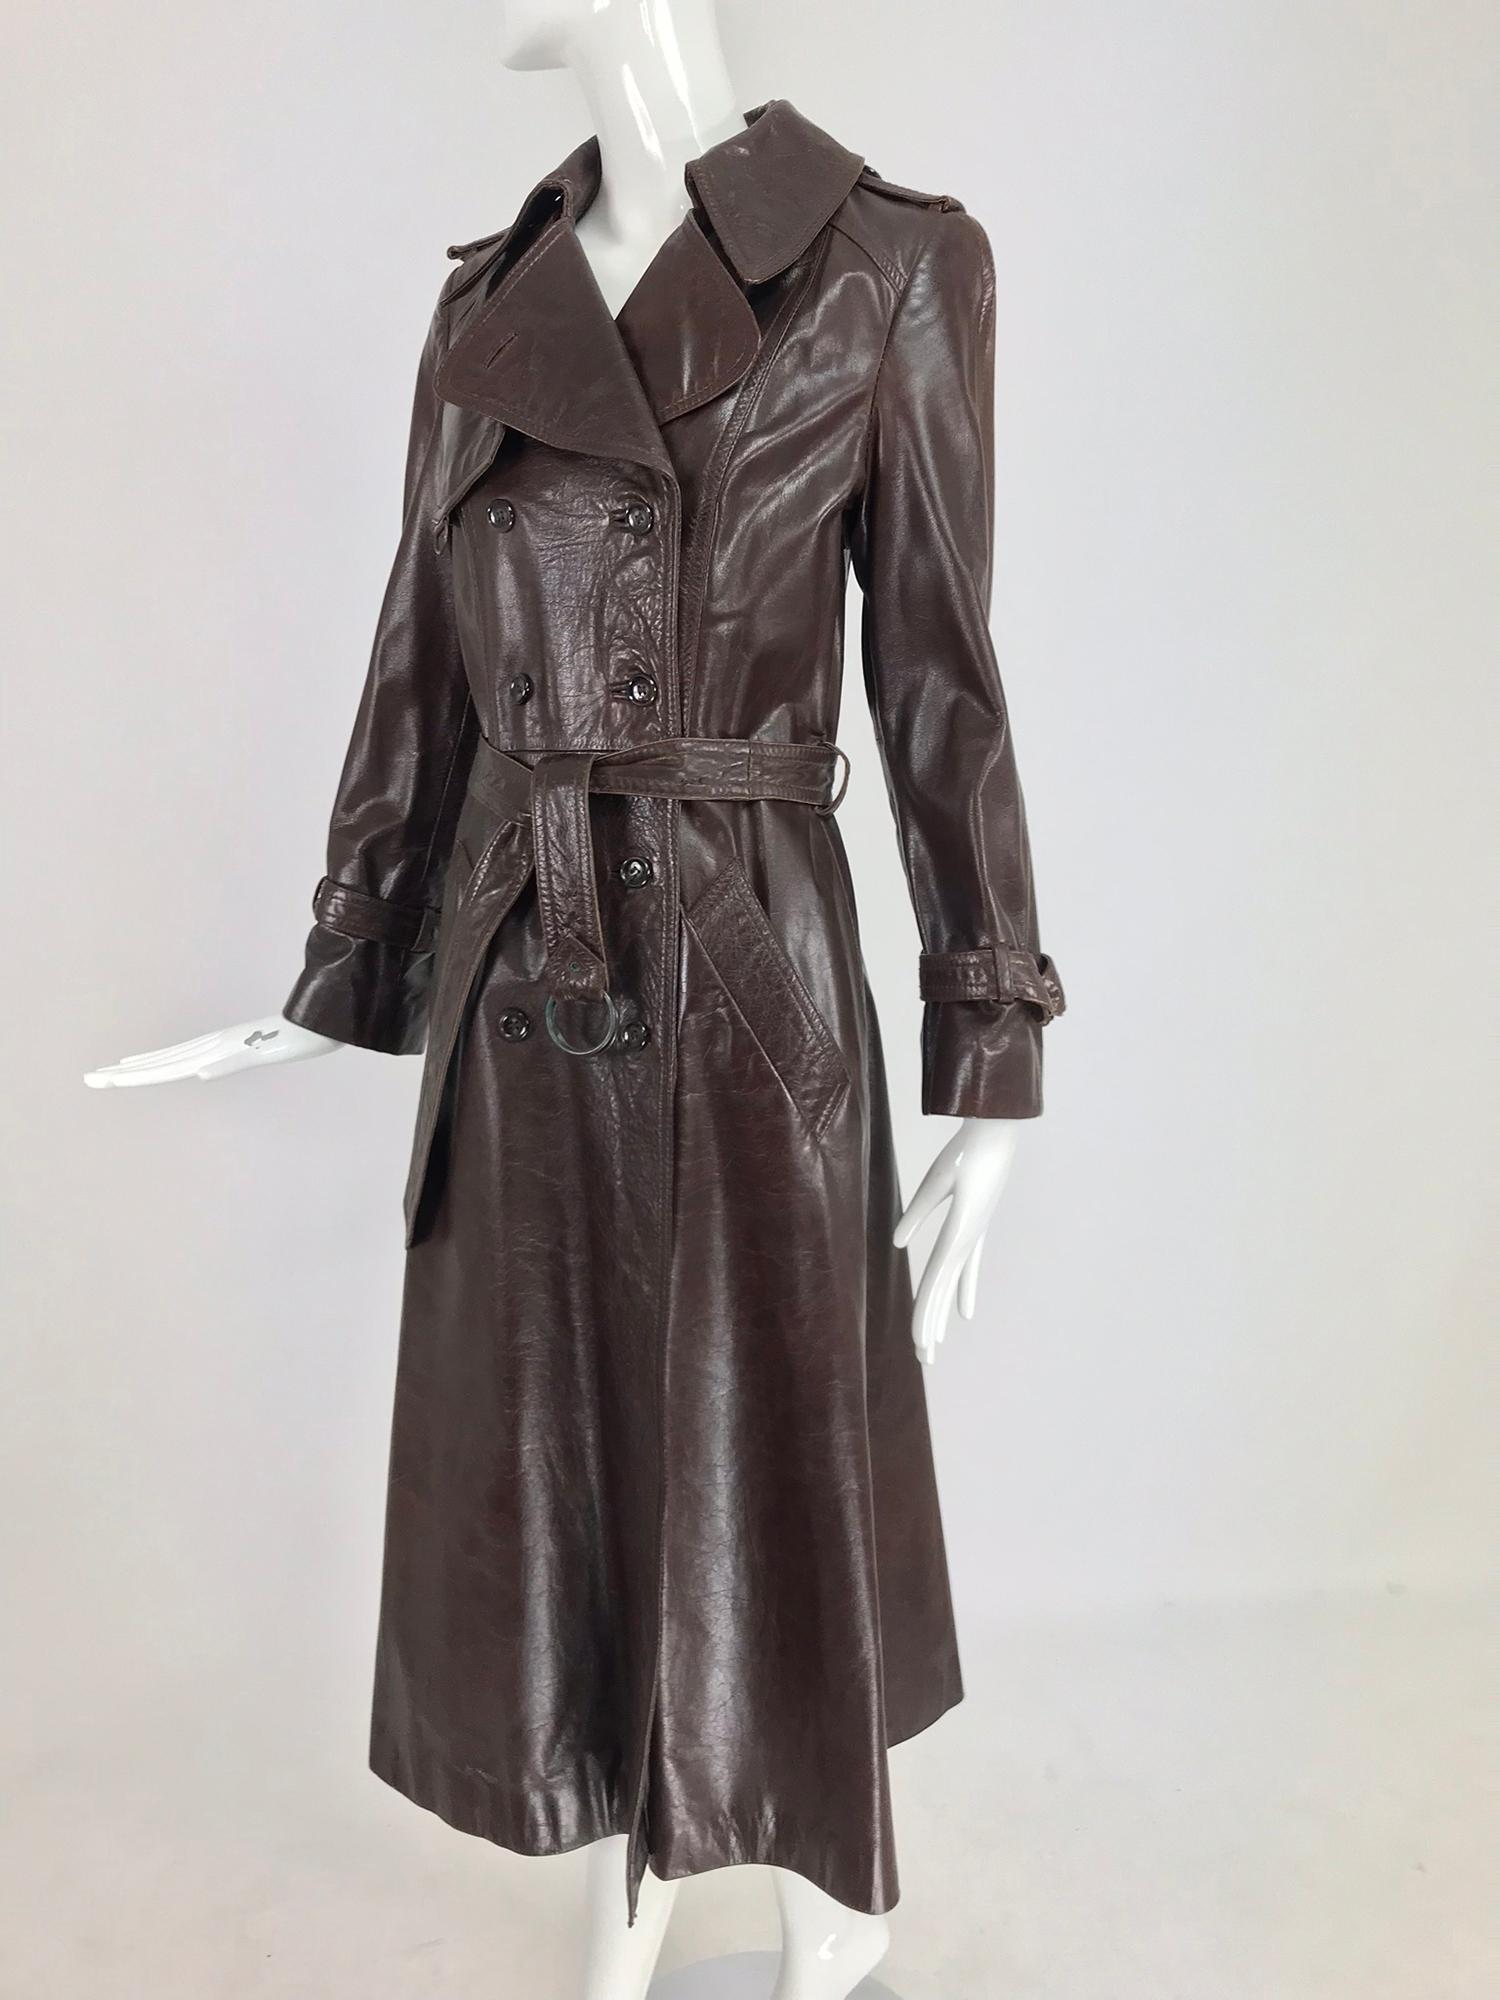 Anne Klein chocolate brown leather trench coat a 1970s classic. Beautiful chocolate brown leather trench with all the details and 70s flair. The leather on this coat has taken on a beautiful patina. Fitted coat has a seamed waist and A line skirt.